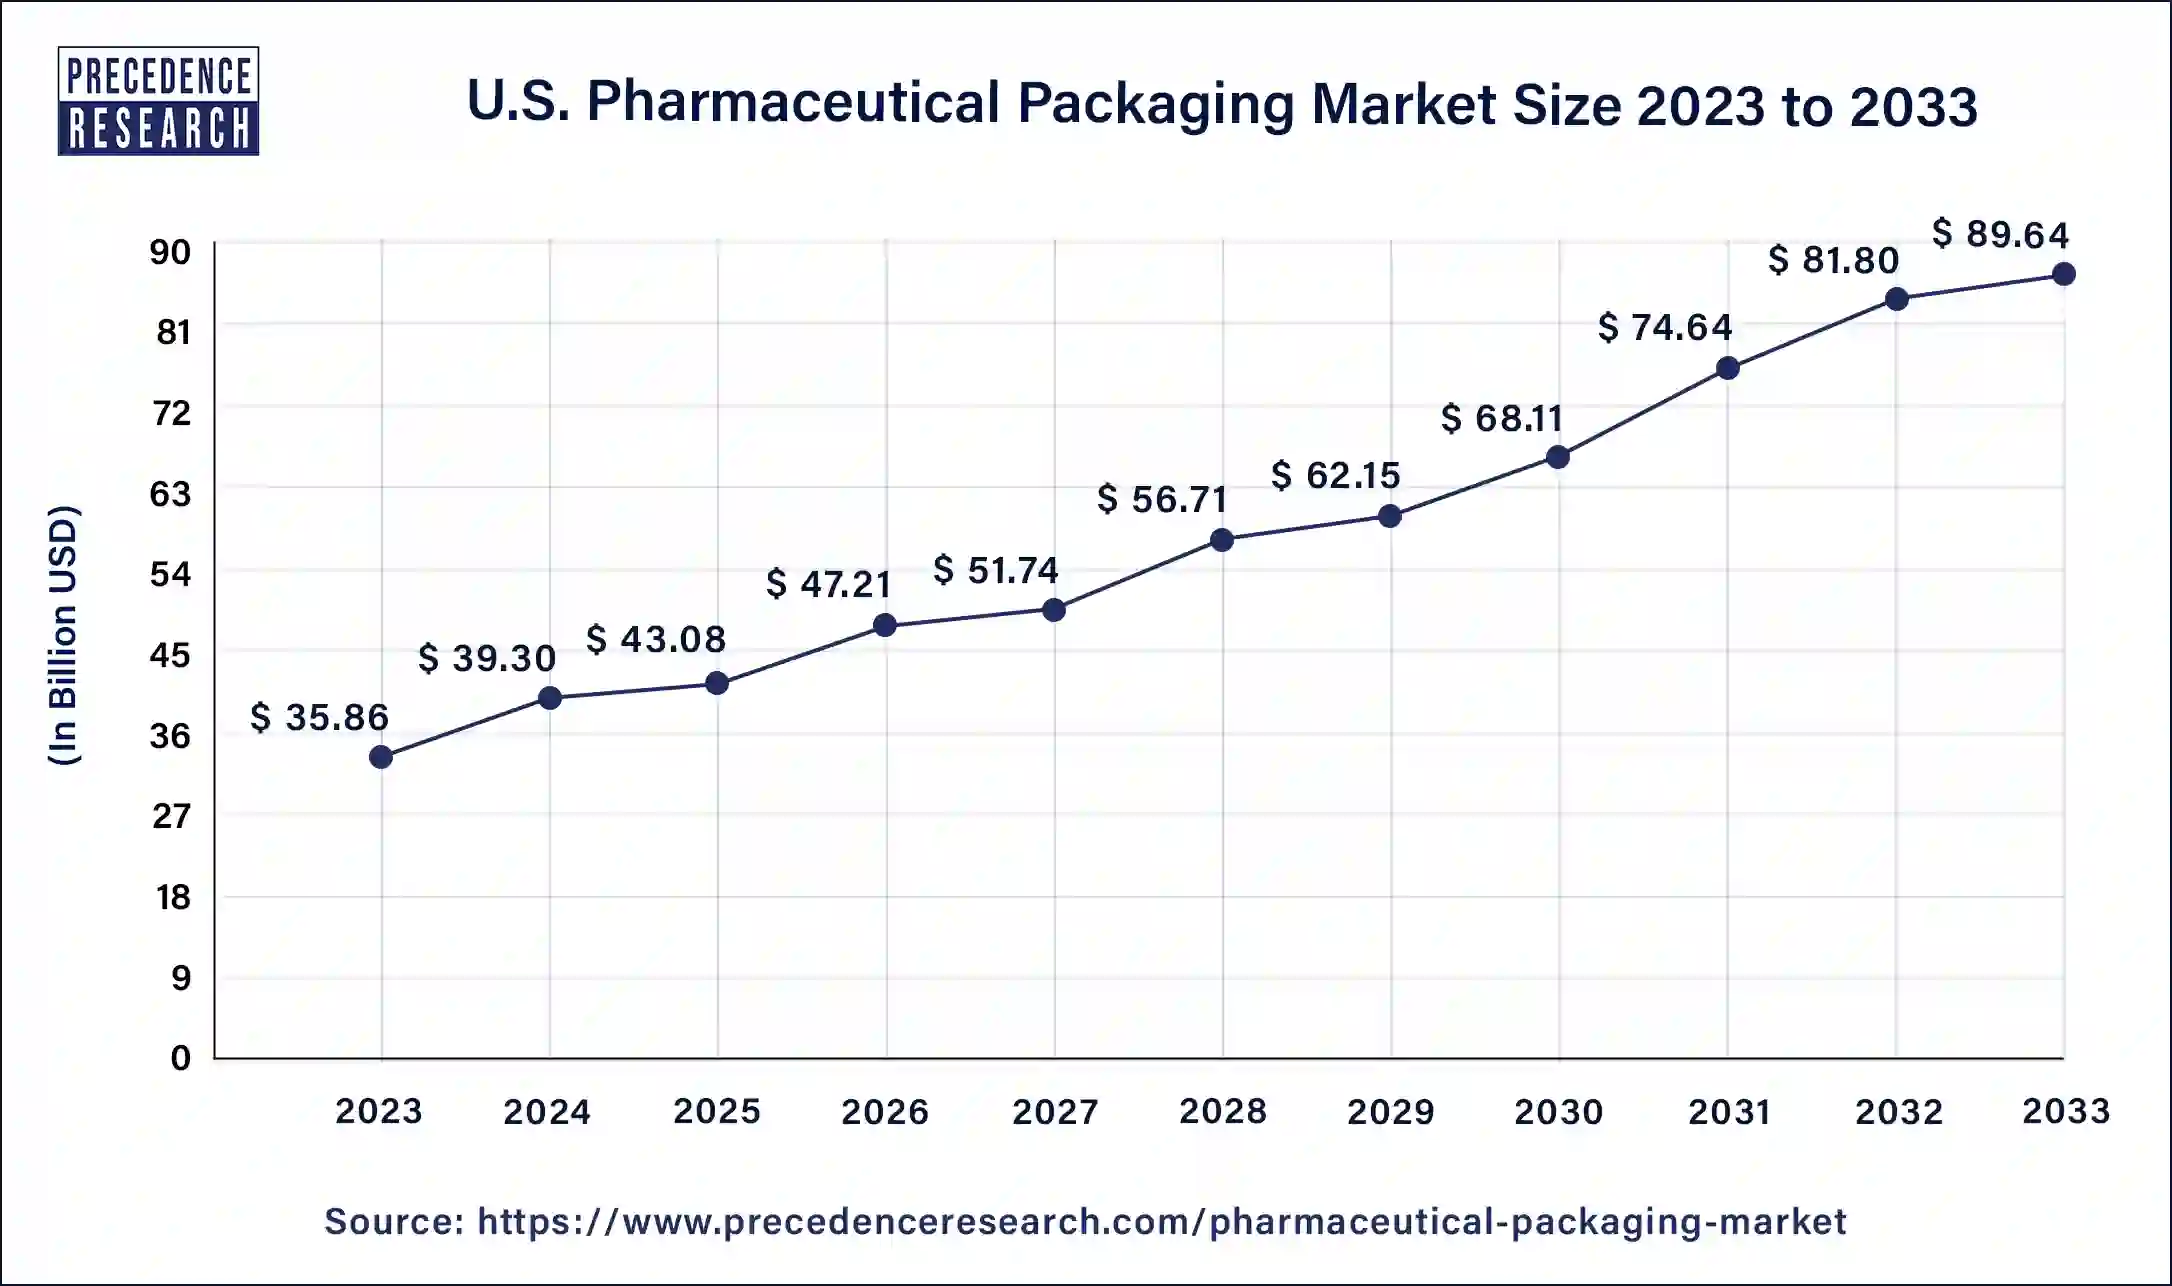 U.S. Pharmaceutical Packaging Market Size 2024 to 2033